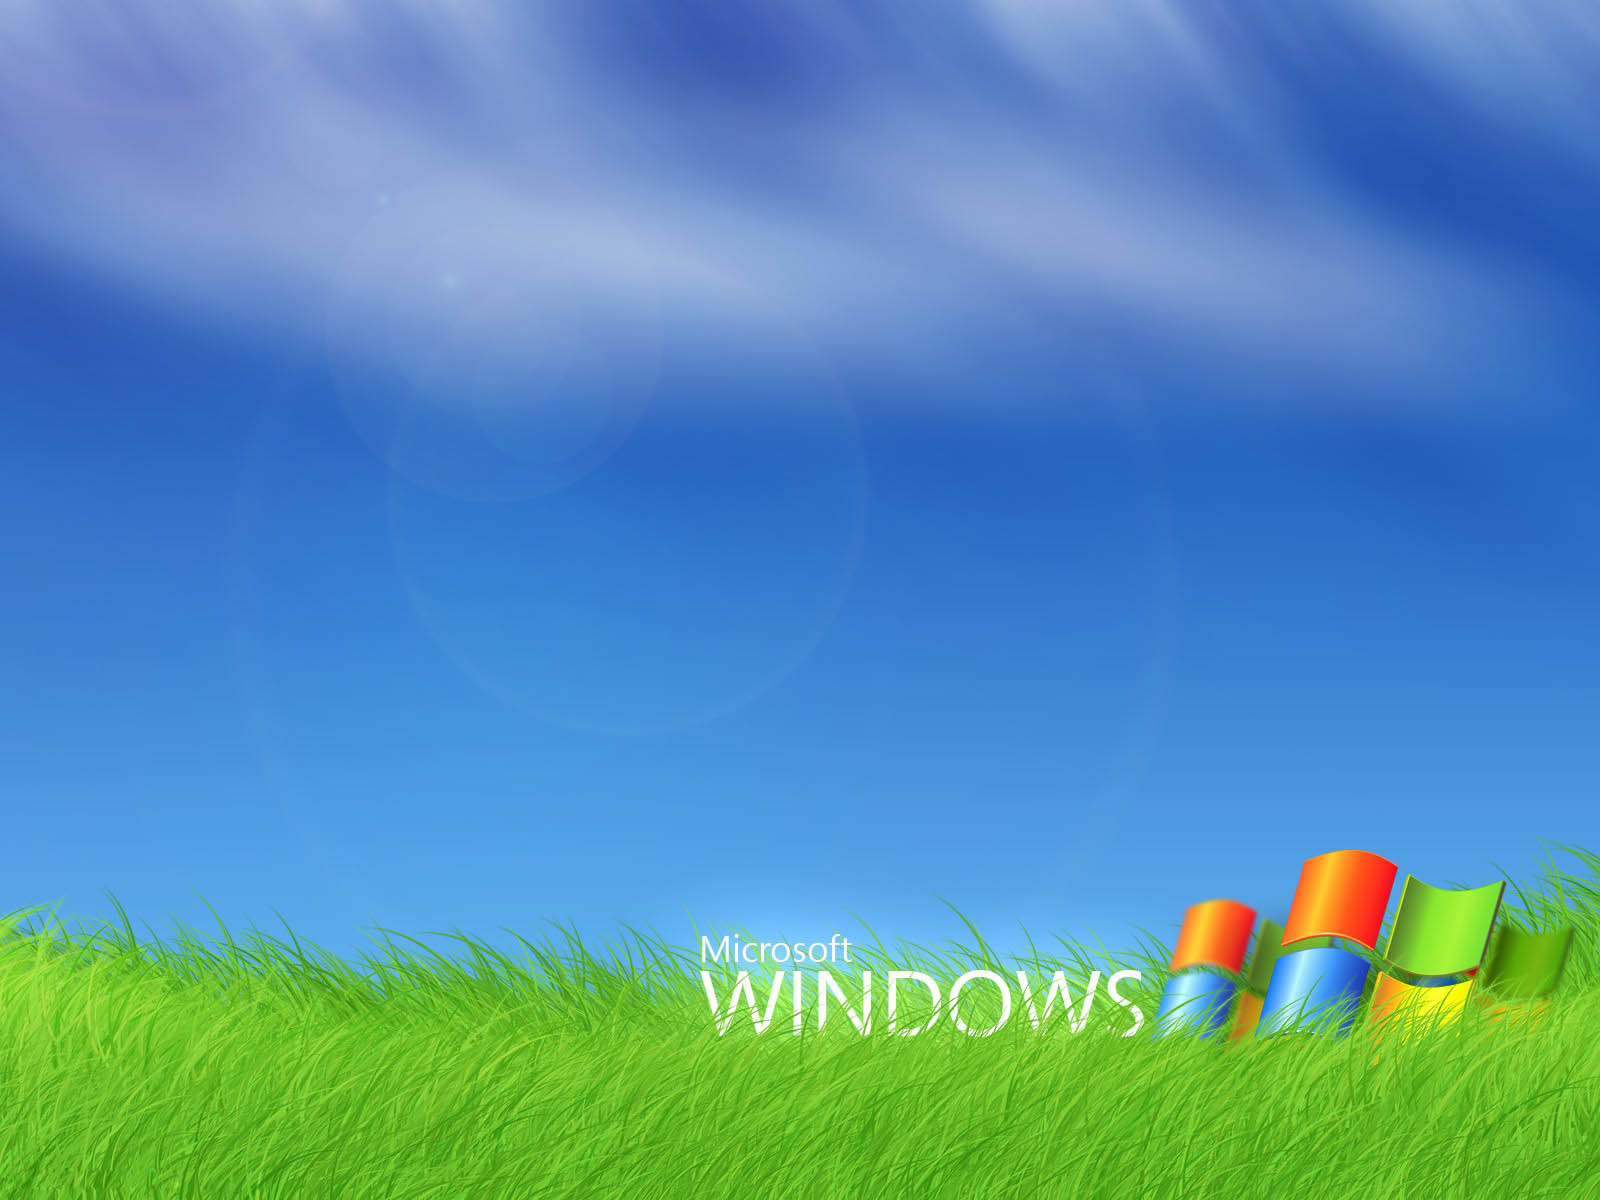 Tag Windows Xp Wallpaper Image Photos Pictures And Background